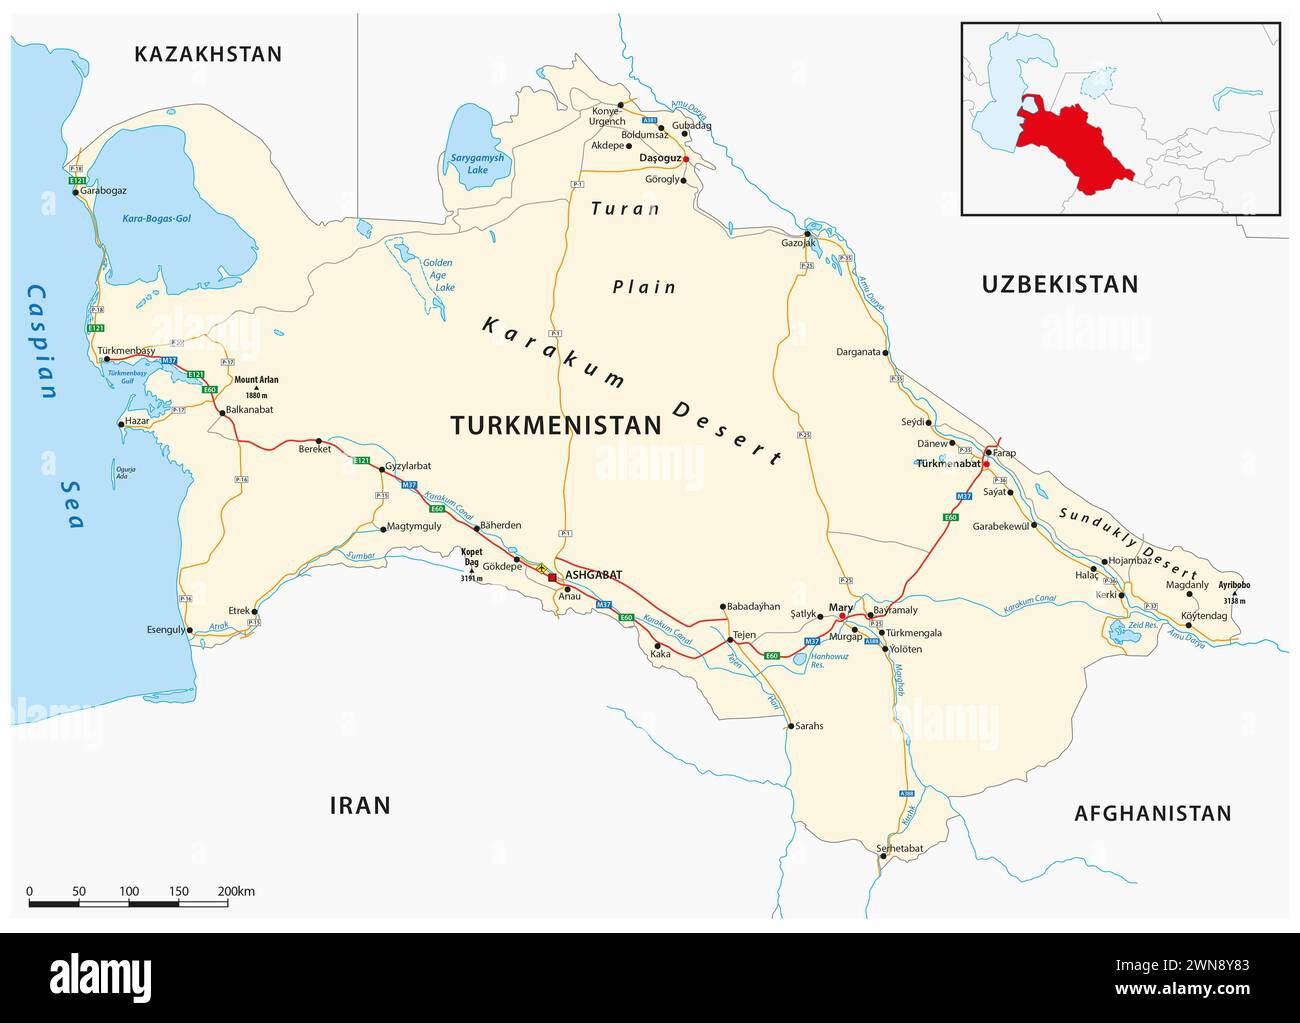 Vector road map of the Central Asian state of Turkmenistan Stock Photo